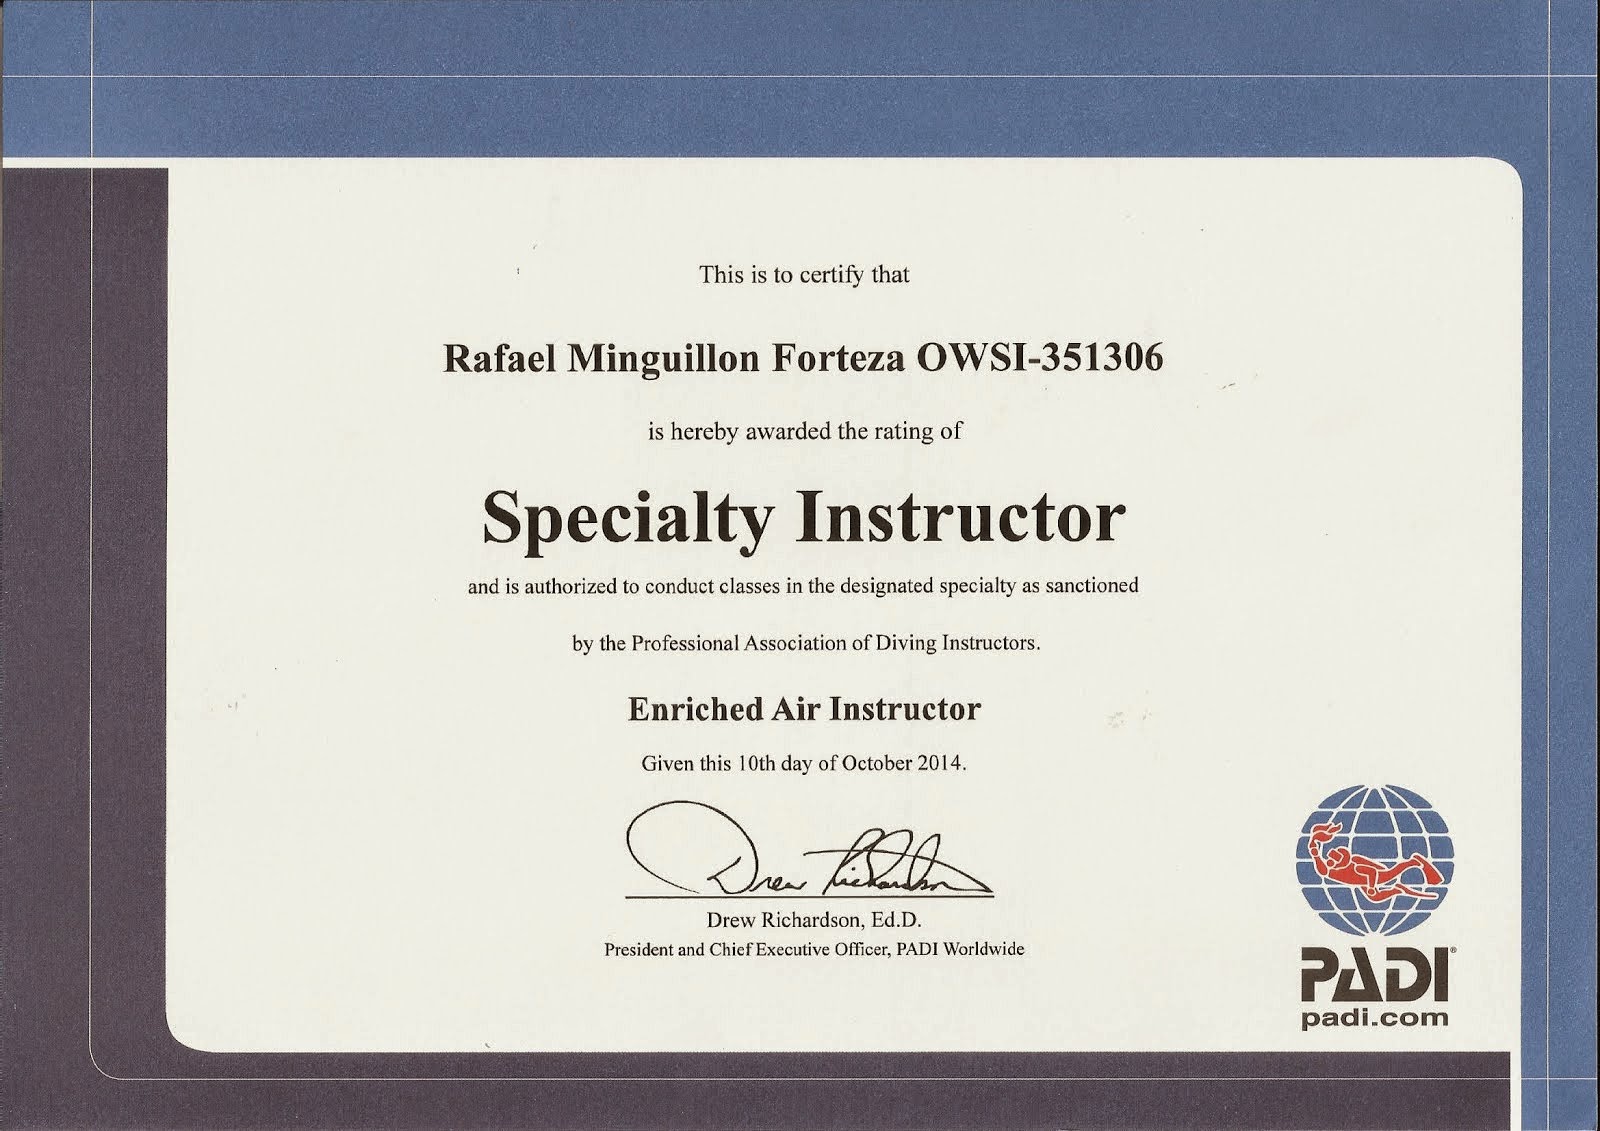 Specialty Instructor Enriched Air Instructor